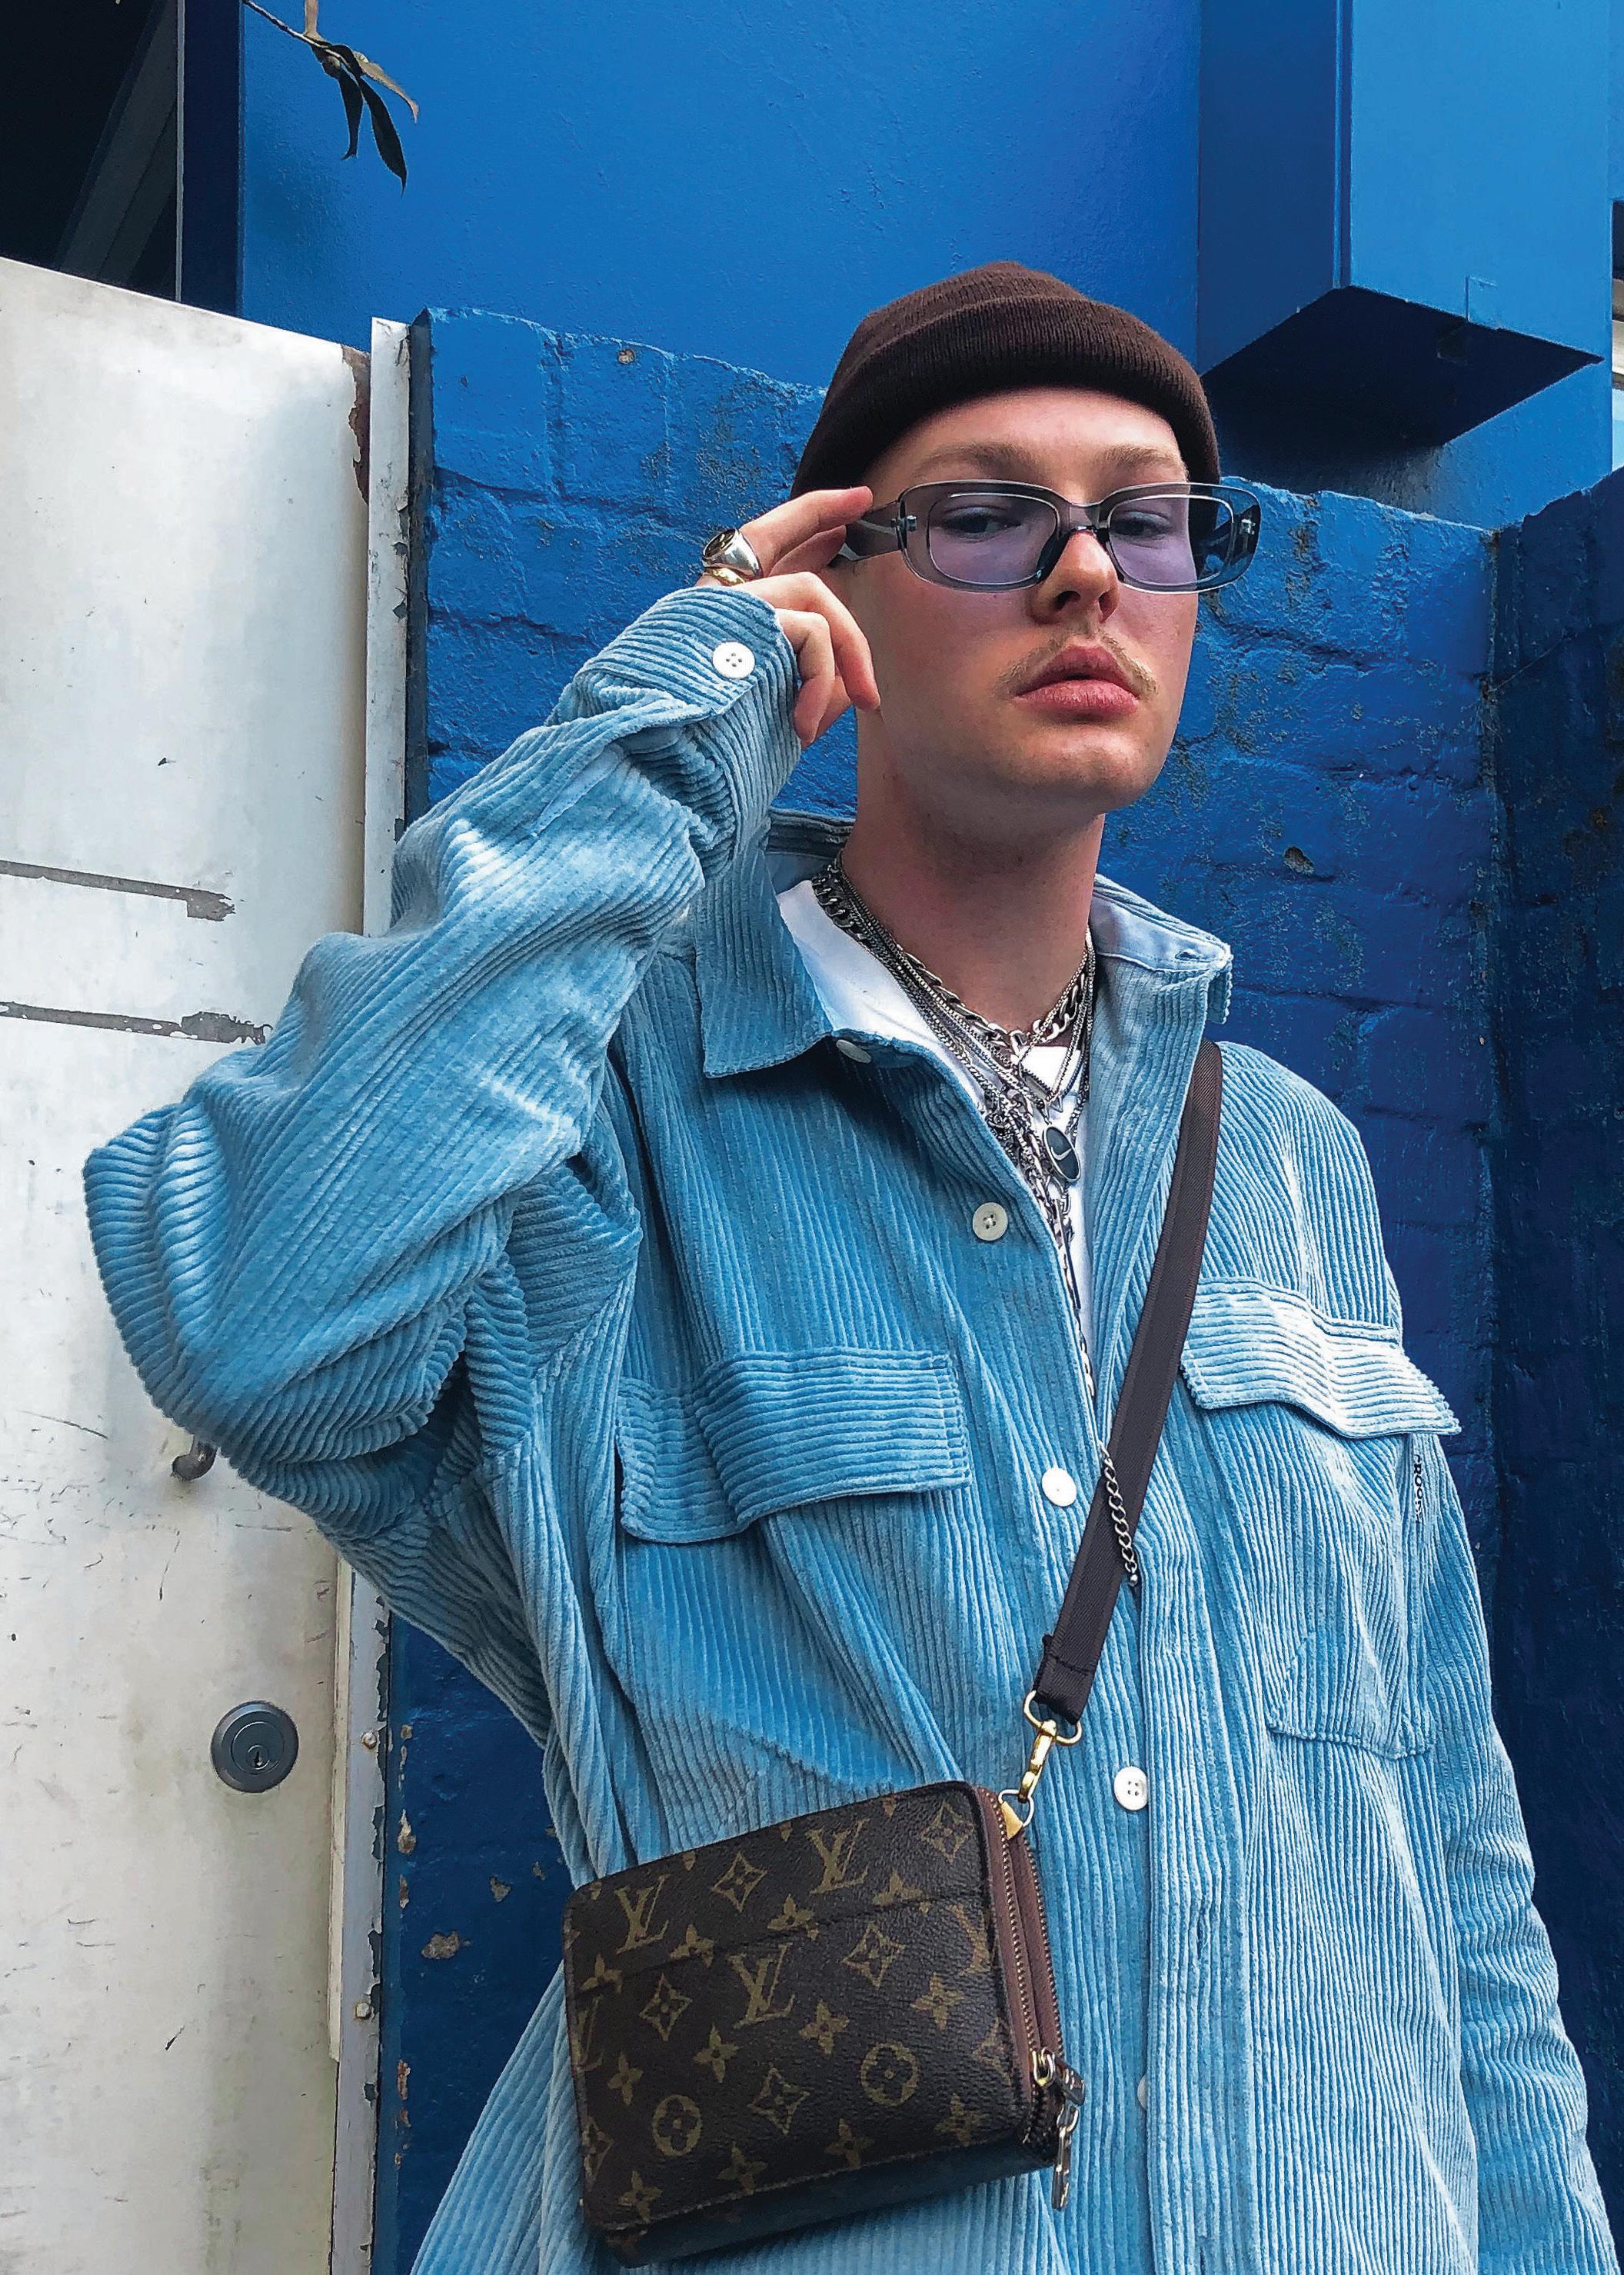 Read article: Style as Self Expression with Connor McWhinnie